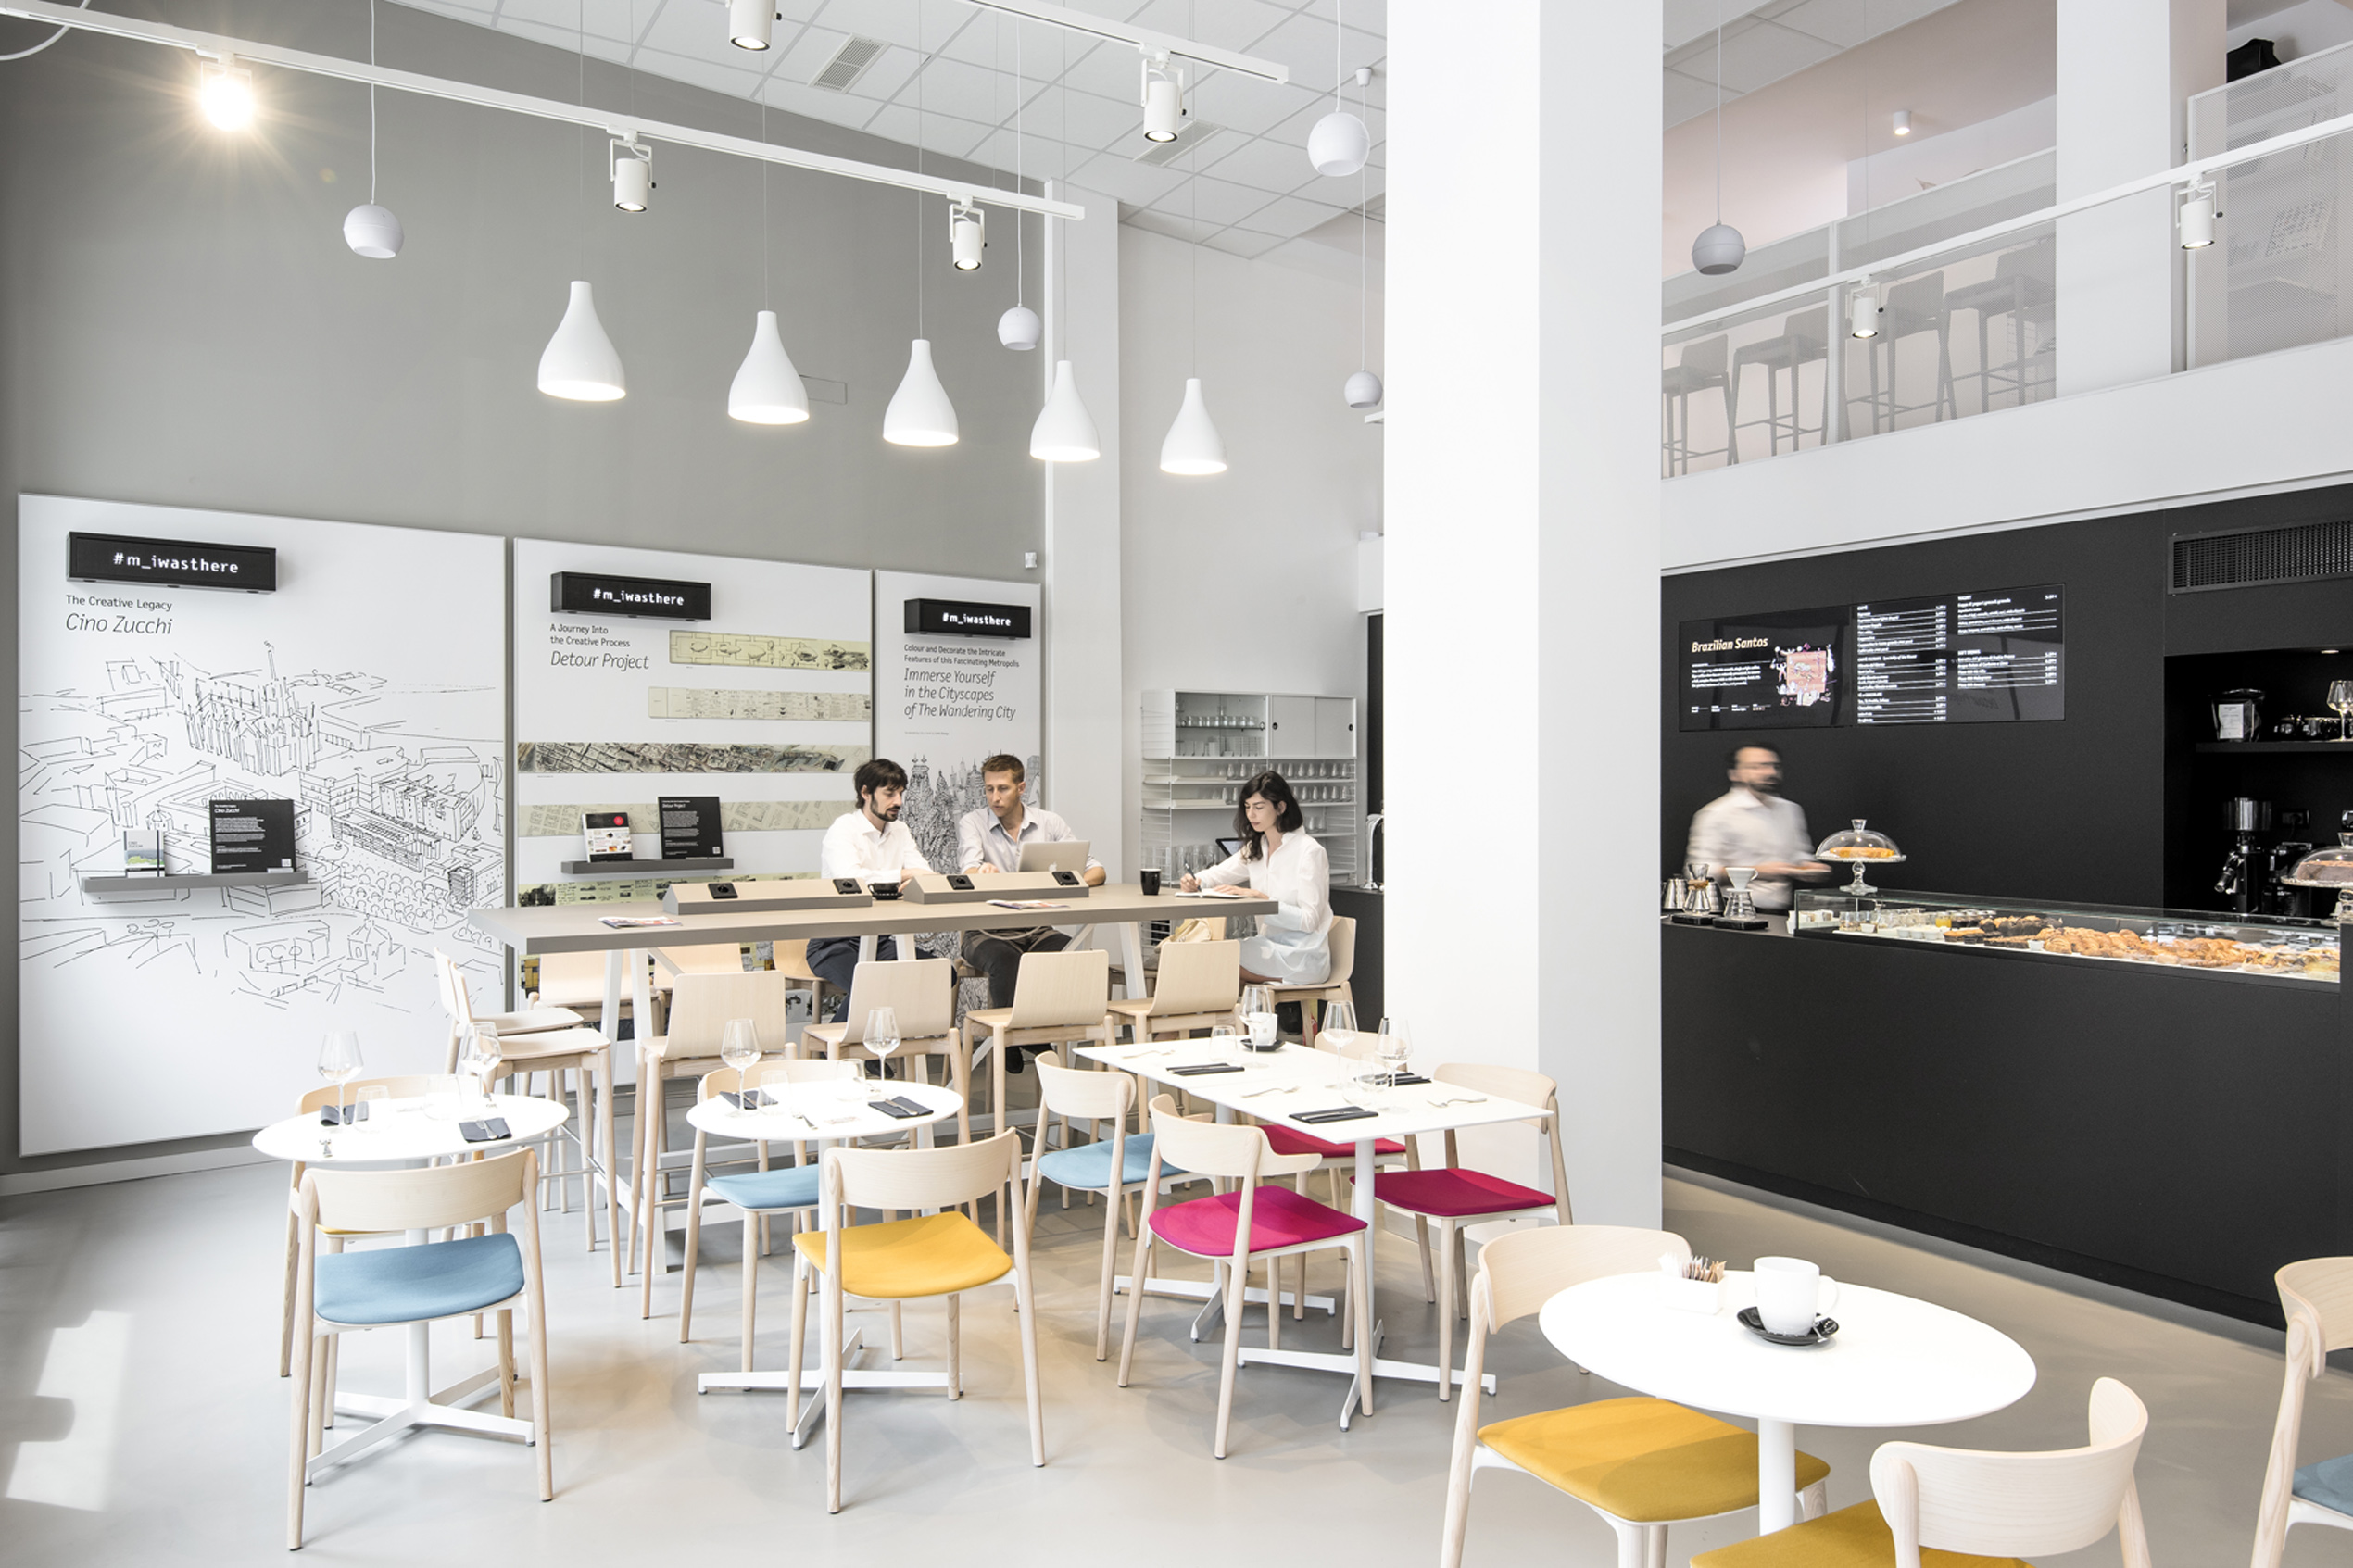 Moleskine Café - a new blank page waiting to be written